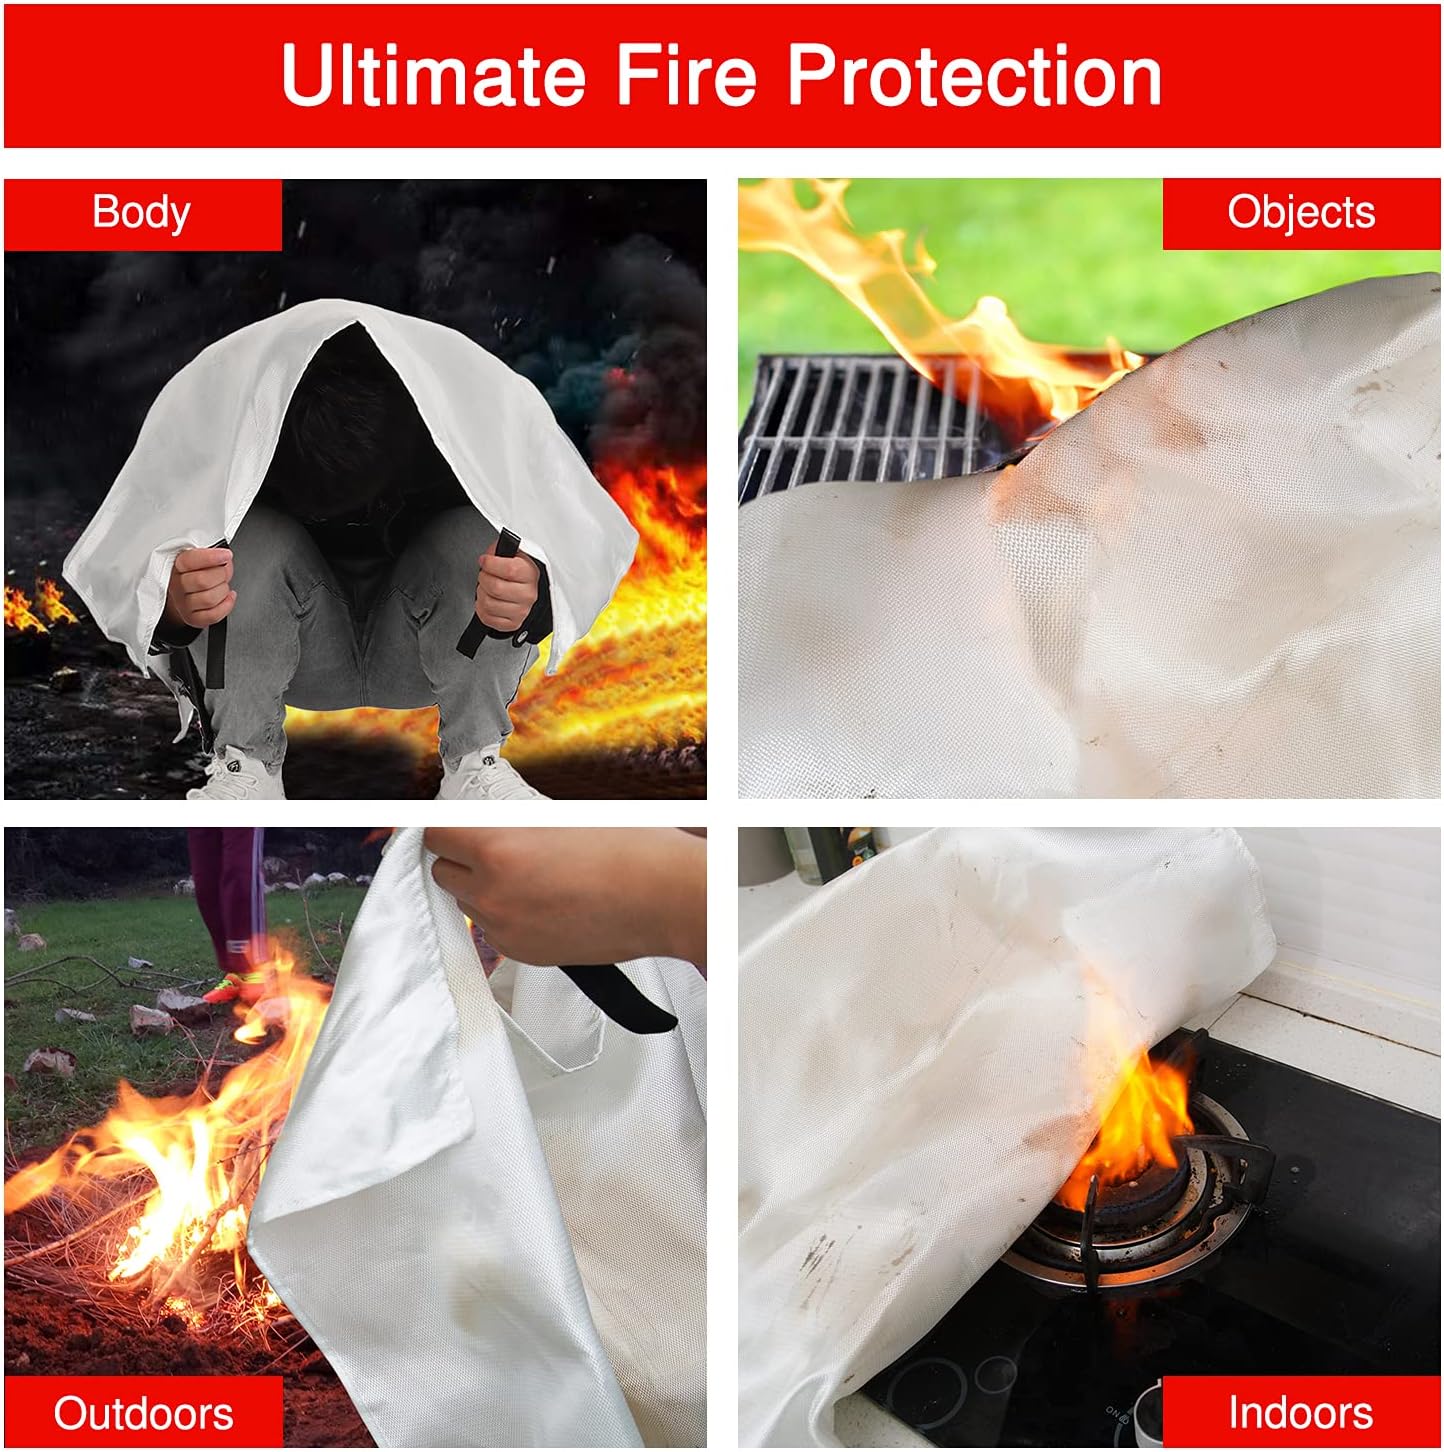 Mart Cobra Fire Blanket for Home Safety x2 Emergency Fire Blanket for Kitchen Fiberglass Fire Blankets Fireproof Blanket House Fire Safety Flame Retardant Fabric Home Safety Tarp Grease Spray